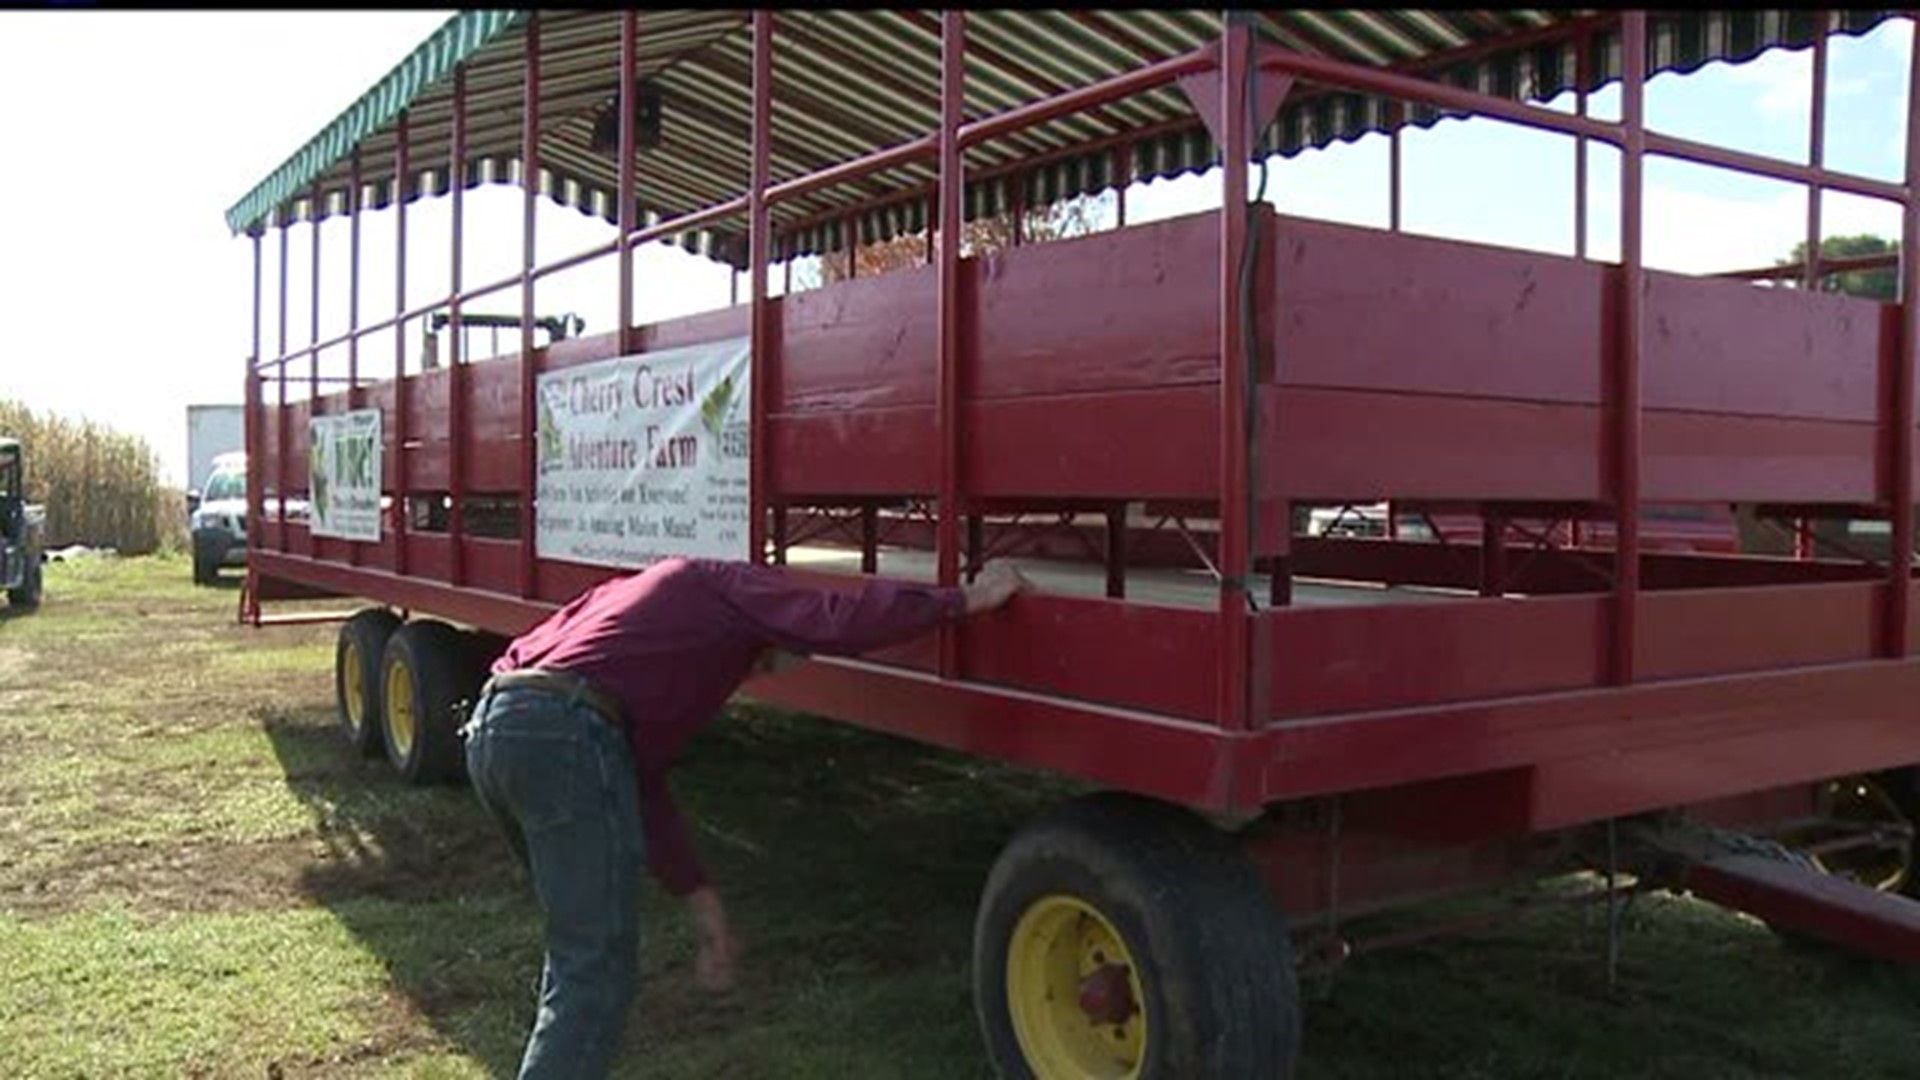 Hayride safety during the fall festivities